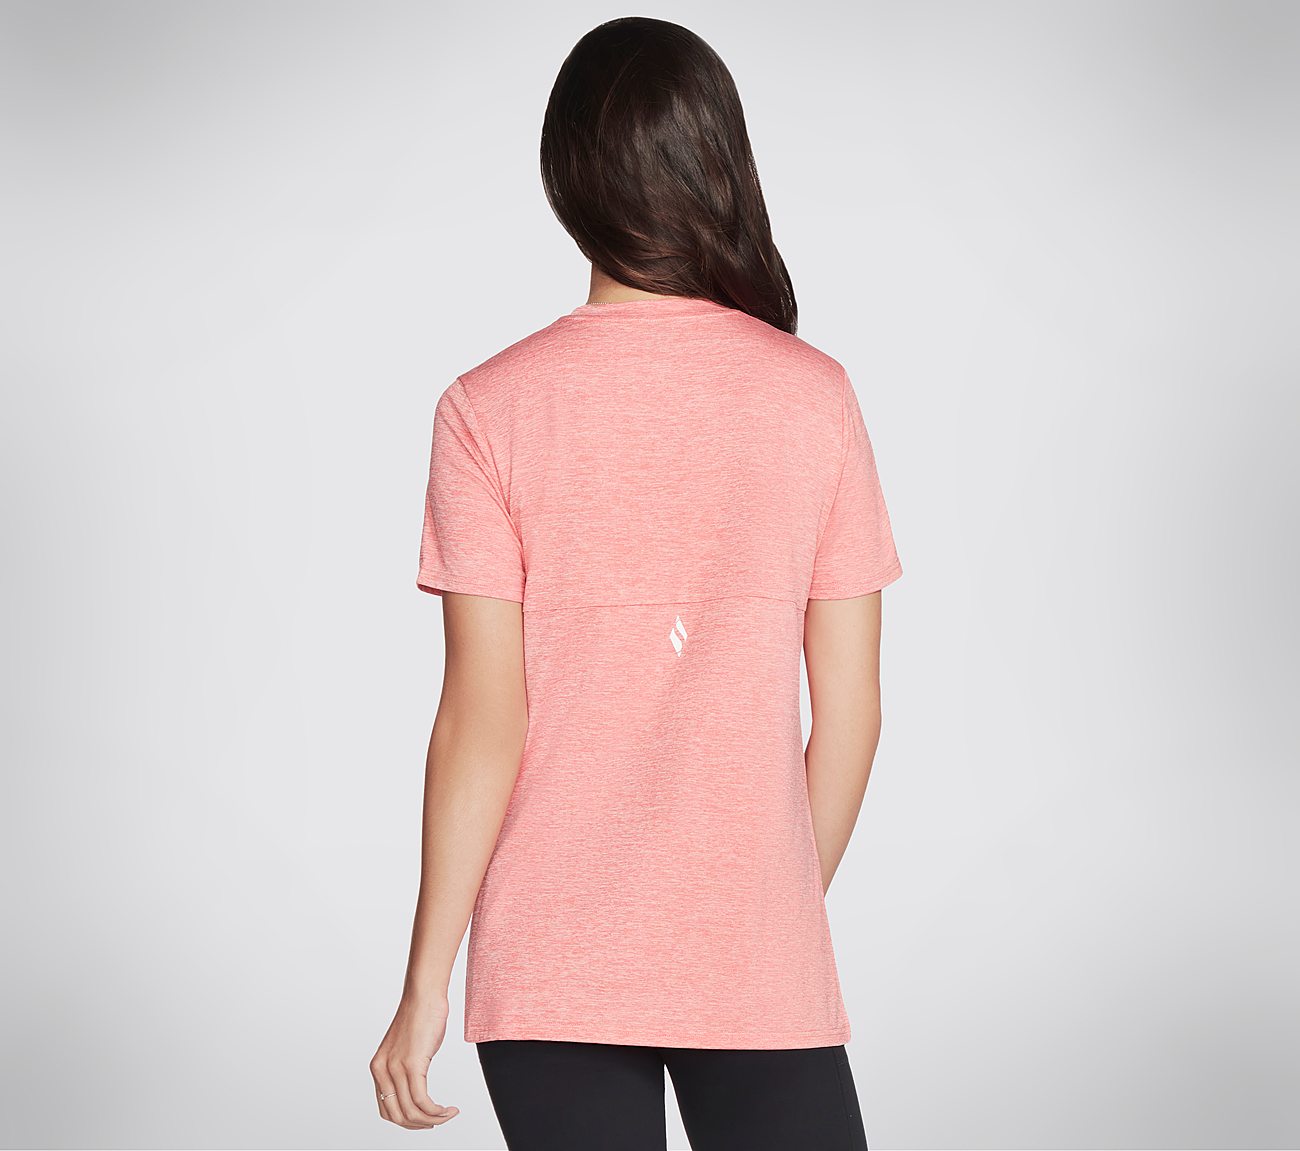 DIAMOND BLISSFUL TEE, CCORAL Apparels Top View